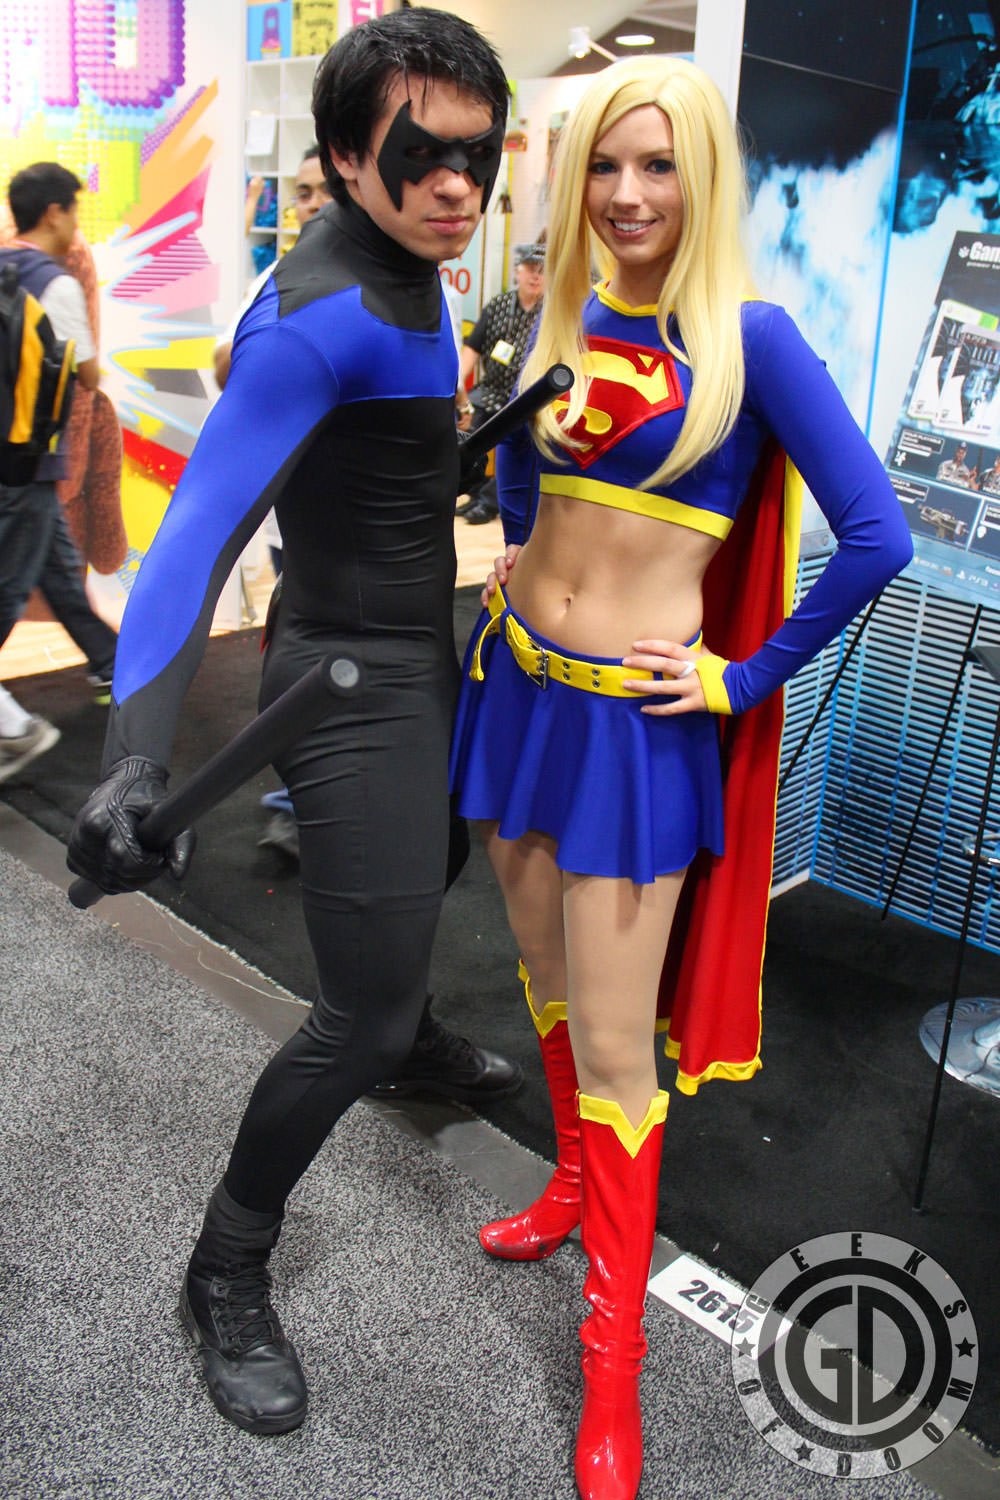 SDCC 2012: Cosplay Round-Up: Nightwing and Supergirl